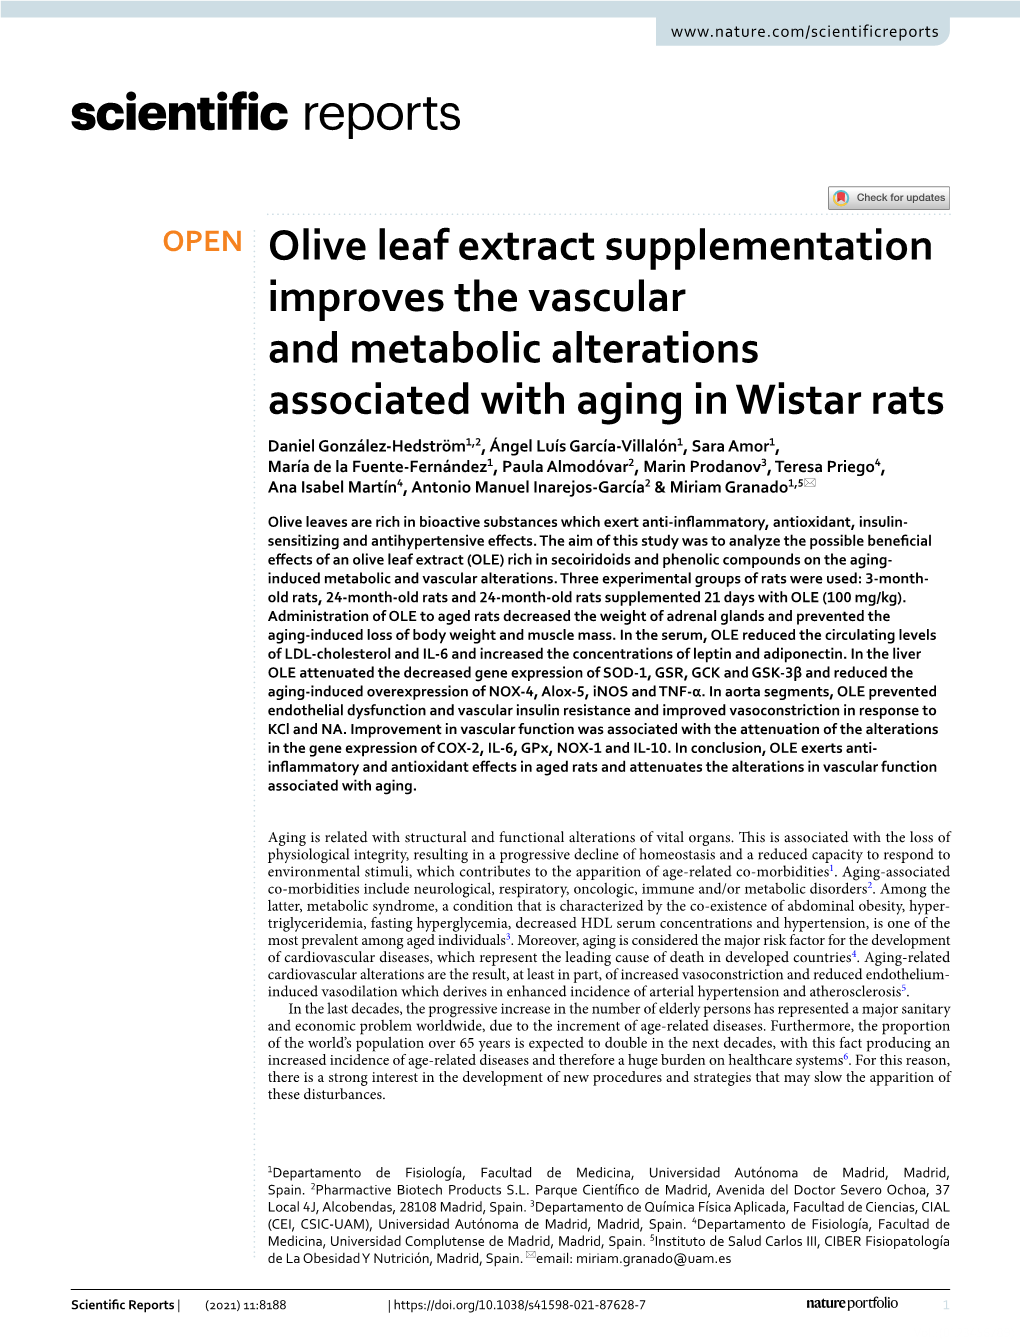 Olive Leaf Extract Supplementation Improves the Vascular and Metabolic Alterations Associated with Aging in Wistar Rats